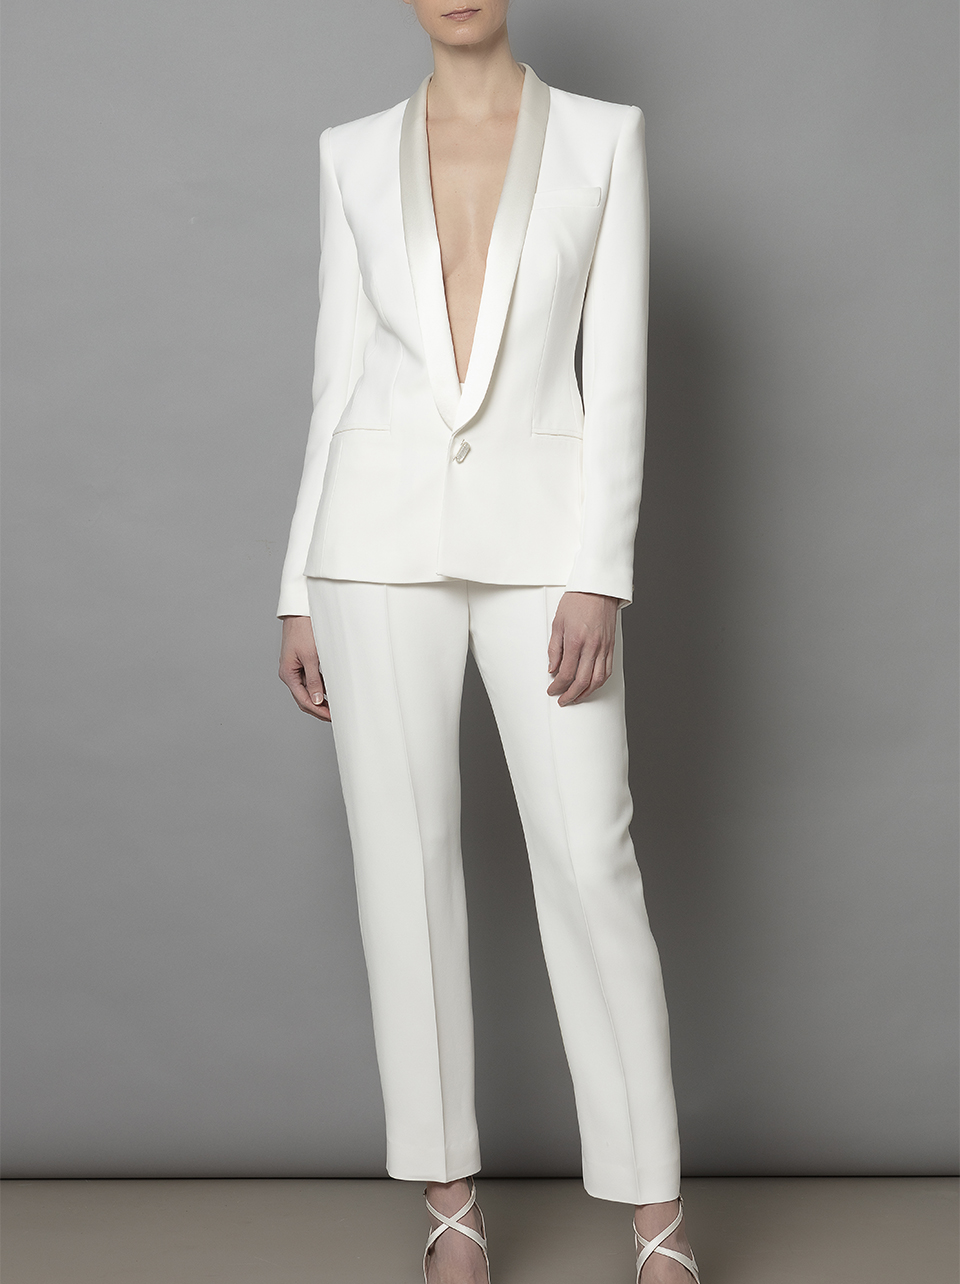 A Sportsmax Trouser Suit in White for a Cool and Classic Bride  Love  My Dress UK Wedding Blog  Wedding Directory